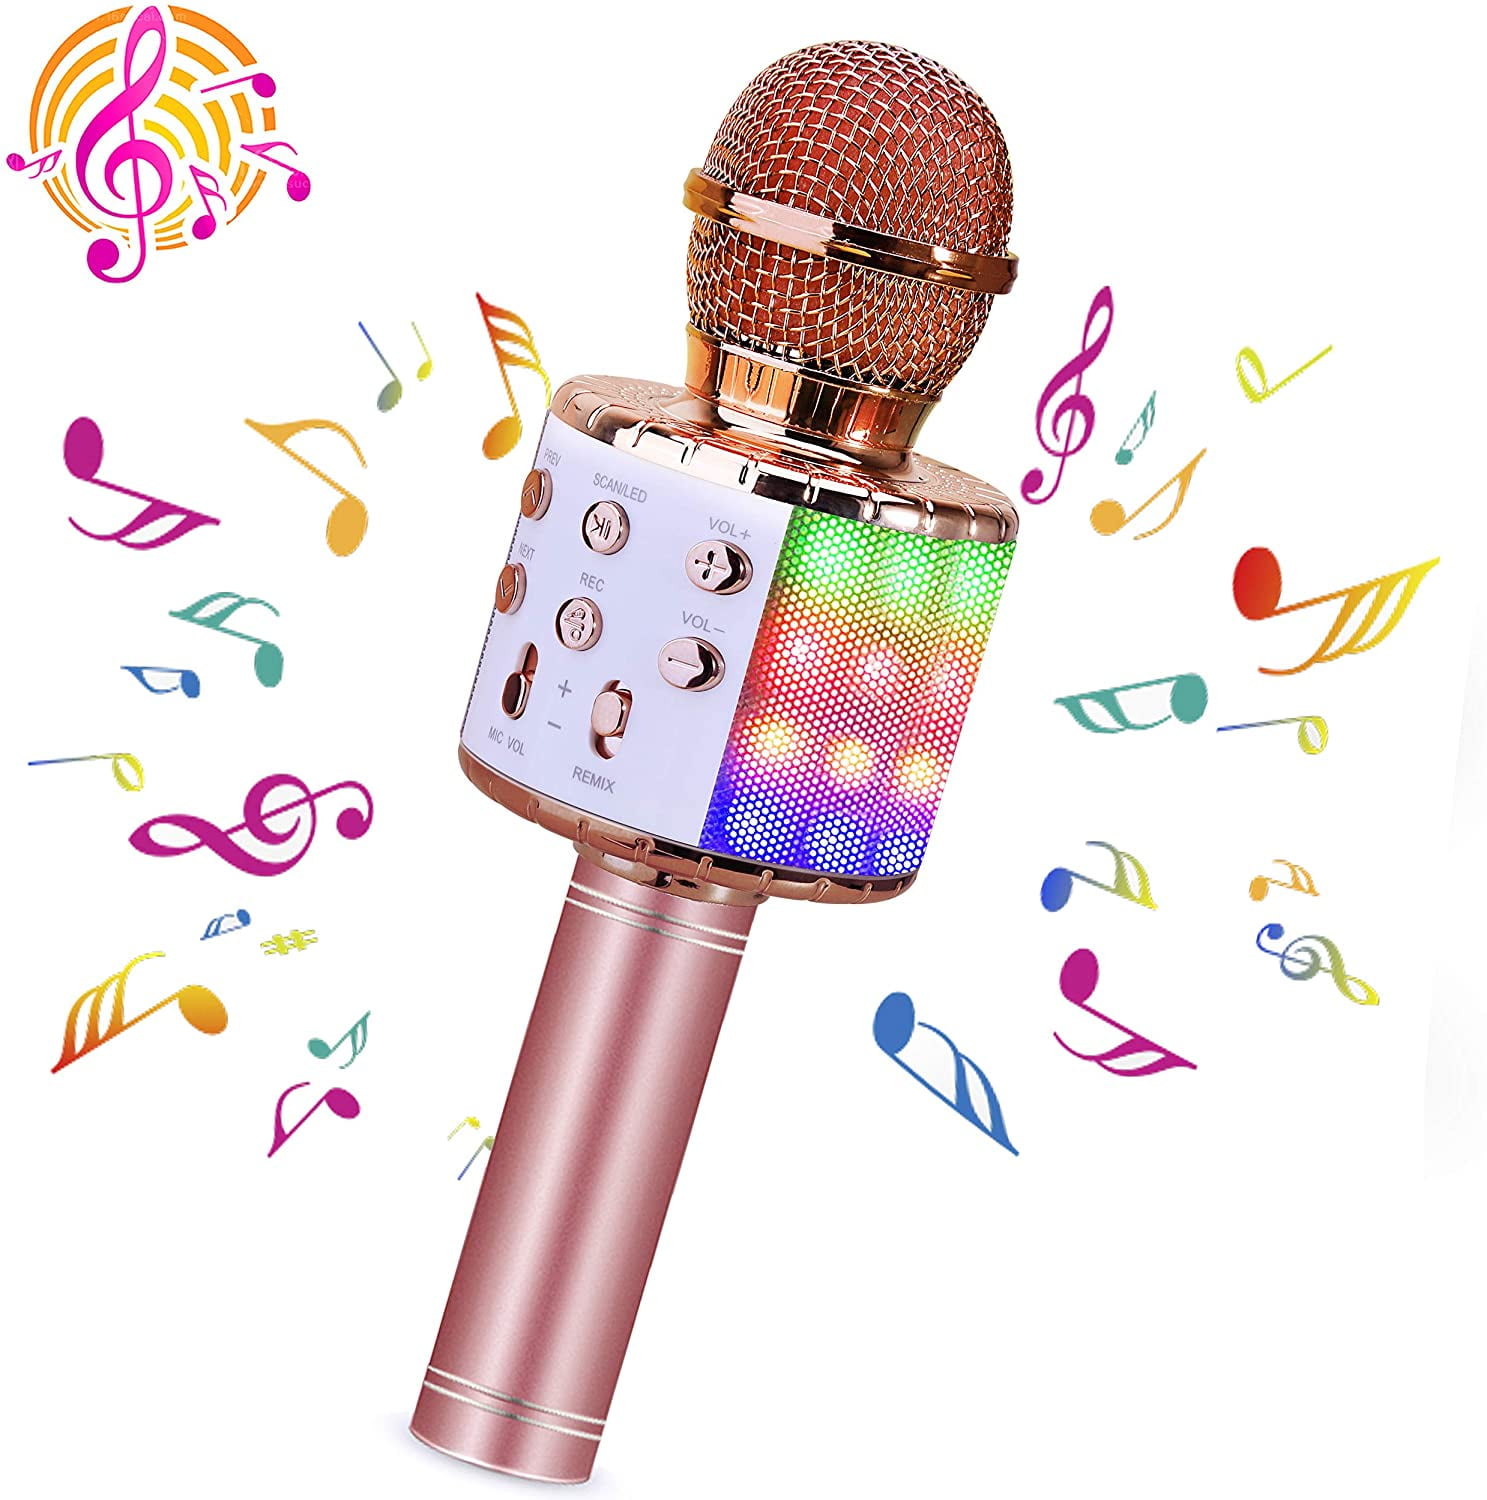 Portable Wireless Bluetooth Singing Mic with Flashing Lights & Magic Voices Blue BONAOK Karaoke Microphone for Kids Fun for Girls and Boys Home Party Birthday Christmas 